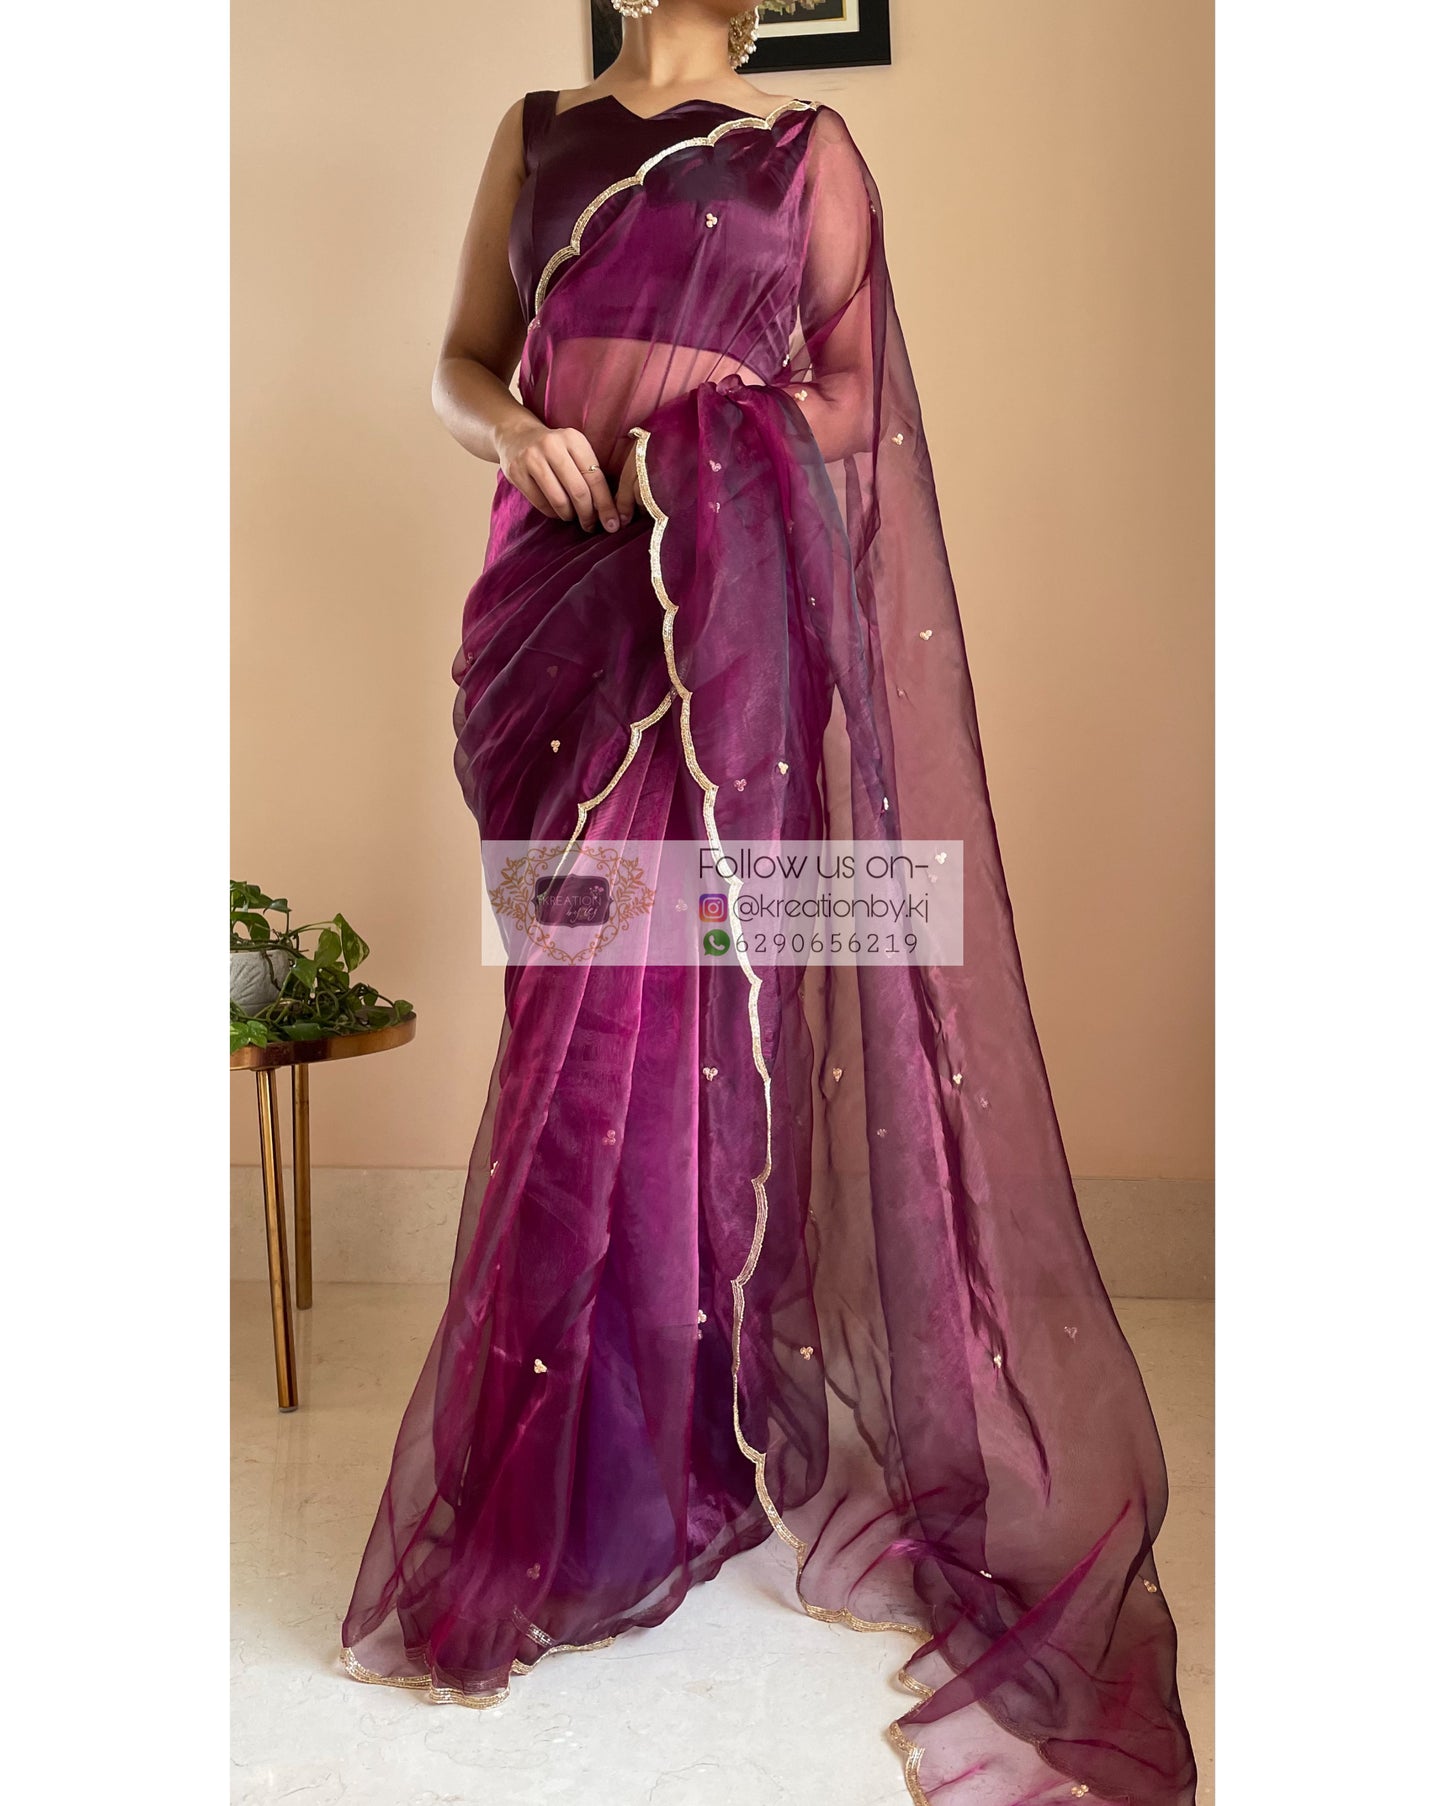 Purple Wine Glass Tissue Saree With Handembroidered Scalloping - kreationbykj